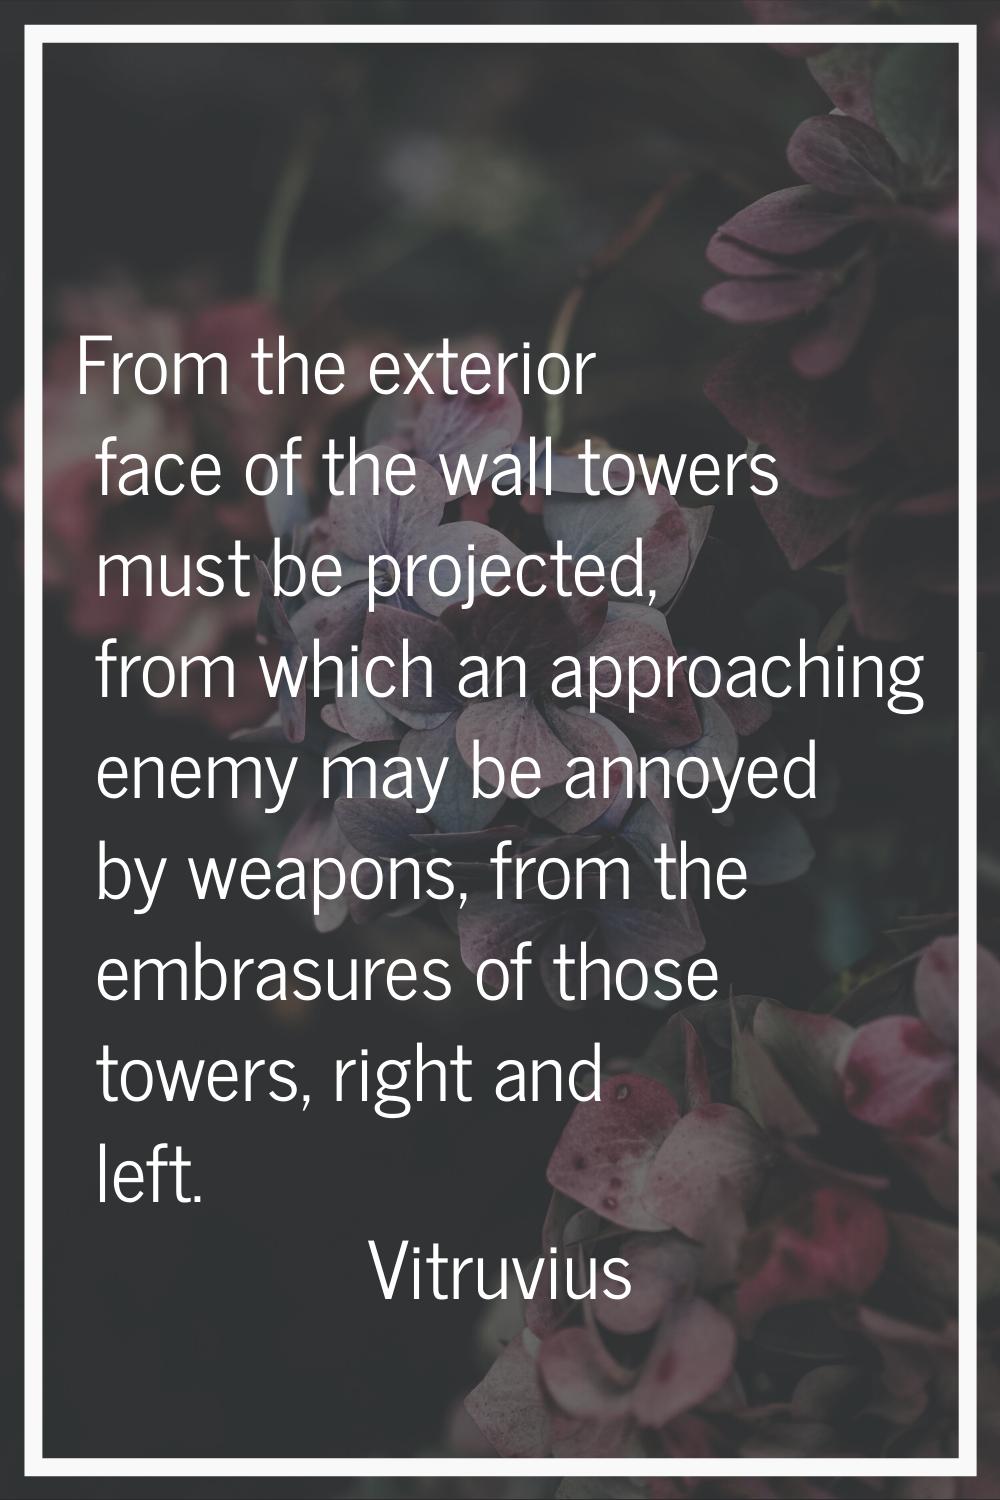 From the exterior face of the wall towers must be projected, from which an approaching enemy may be